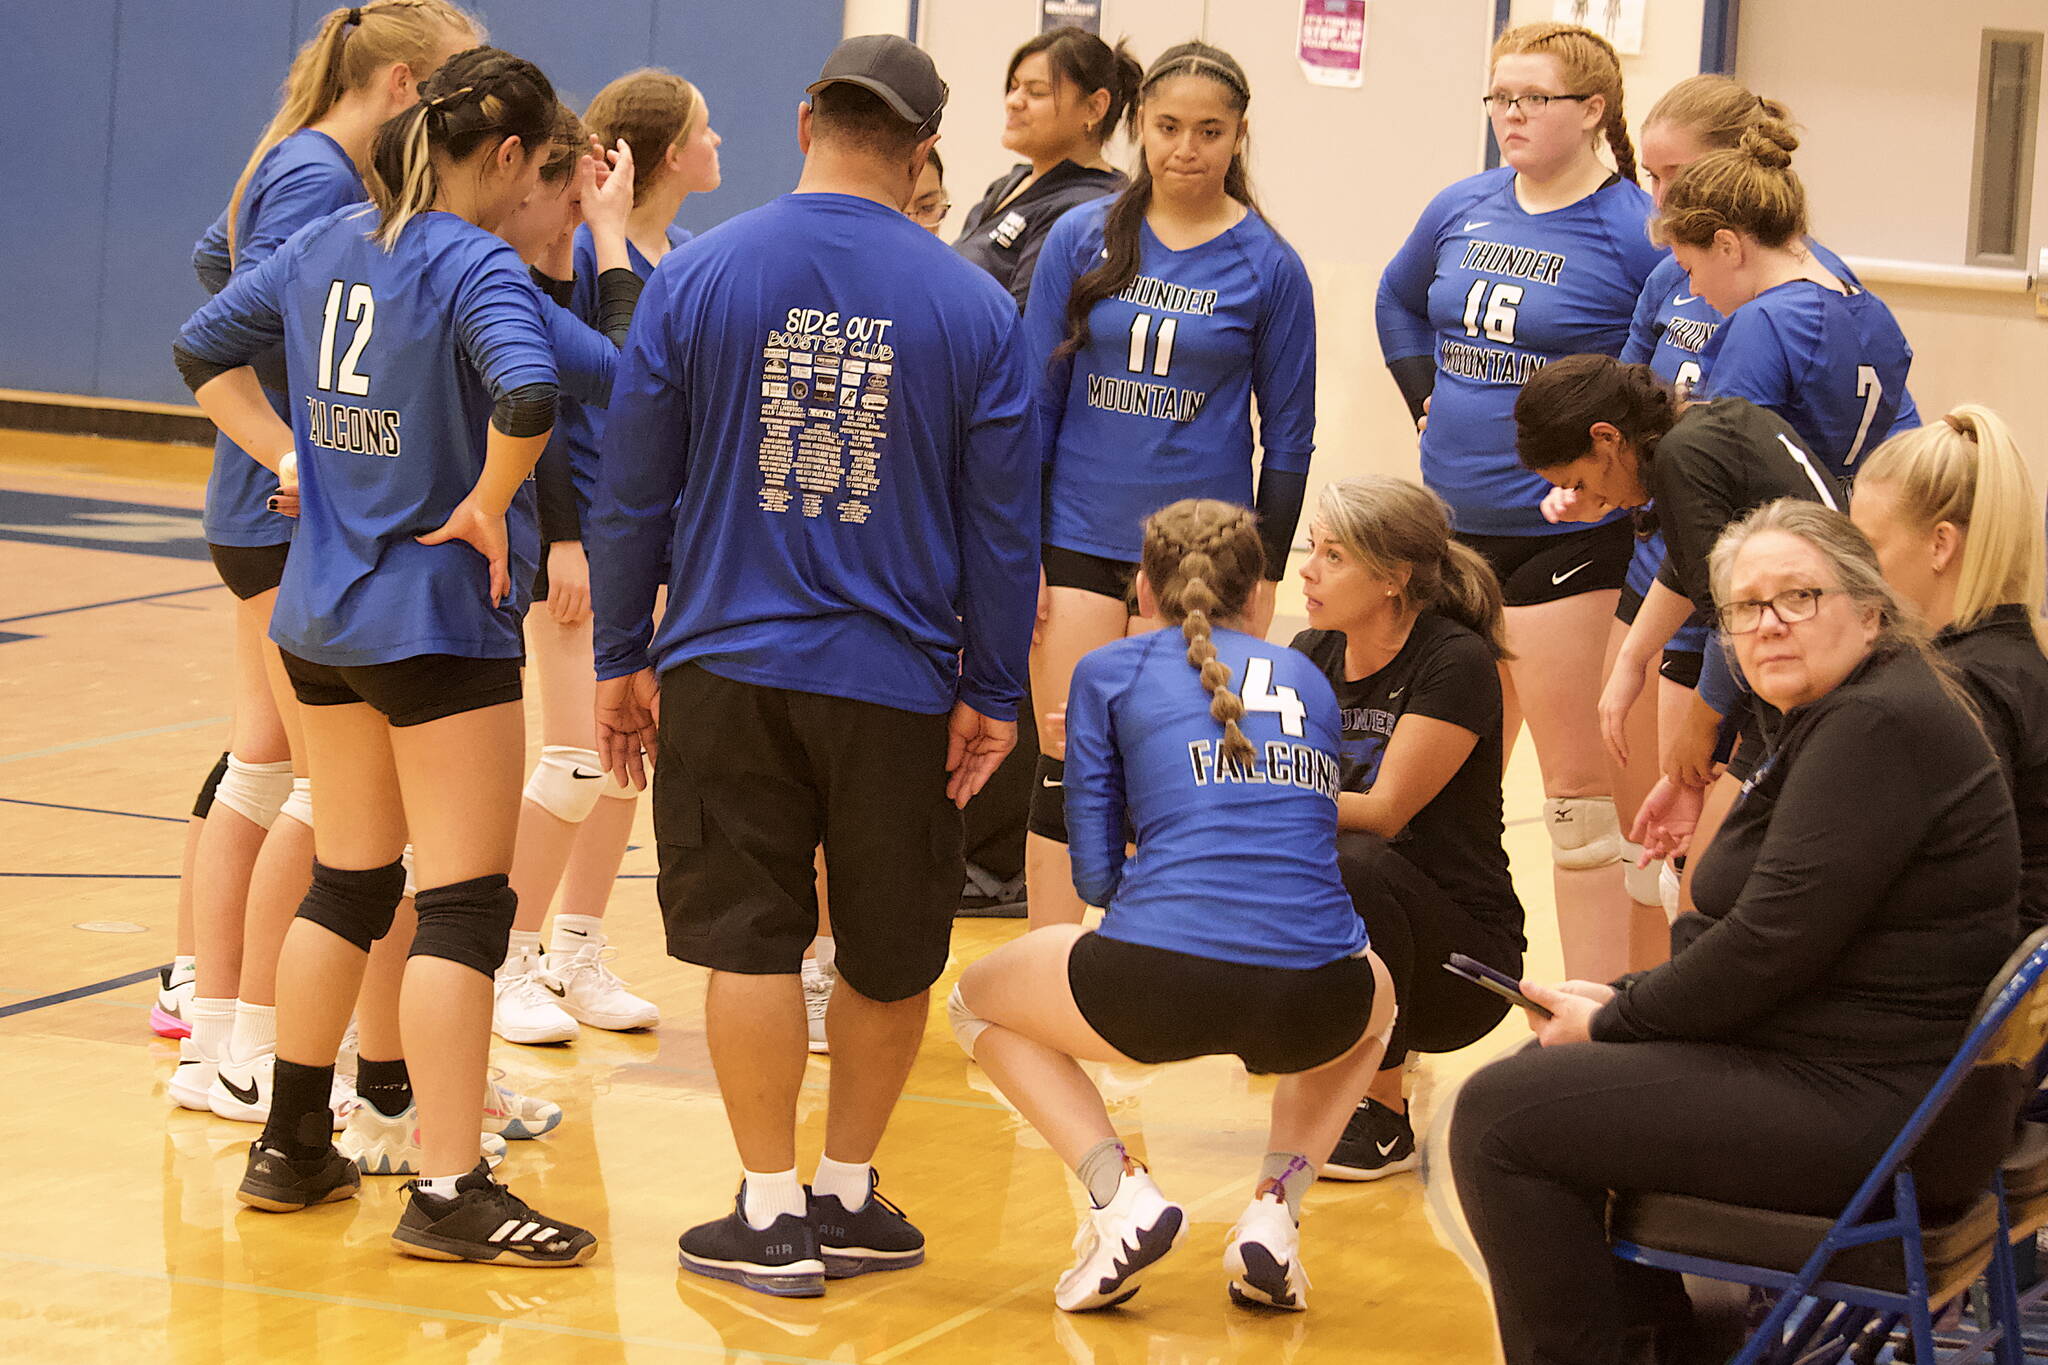 Thunder Mountain High School coach Julie Herman huddles with her players during a timeout in the team’s five-game set against Ketchikan High School on Saturday night at TMHS. (Mark Sabbatini / Juneau Empire)